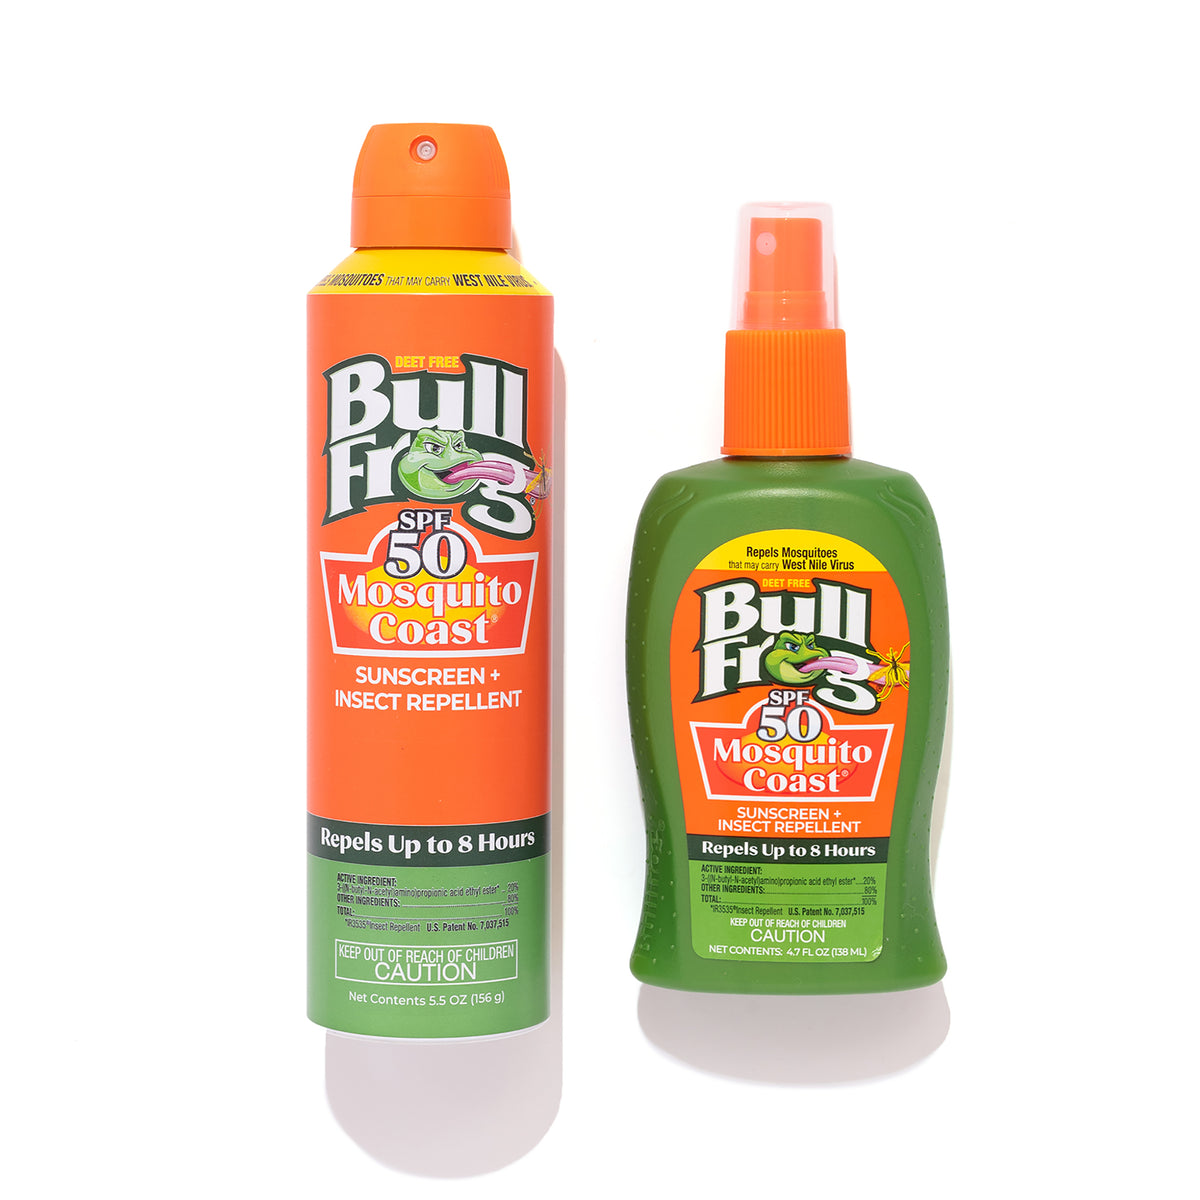 Combo 2-Pack: Pump/Continuous Sunscreen & Bug Spray Pack Mosquito Coast – Bullfrog  Sunscreen + Insect Repellent – Bullfrog Sunscreen & Insect Repellent